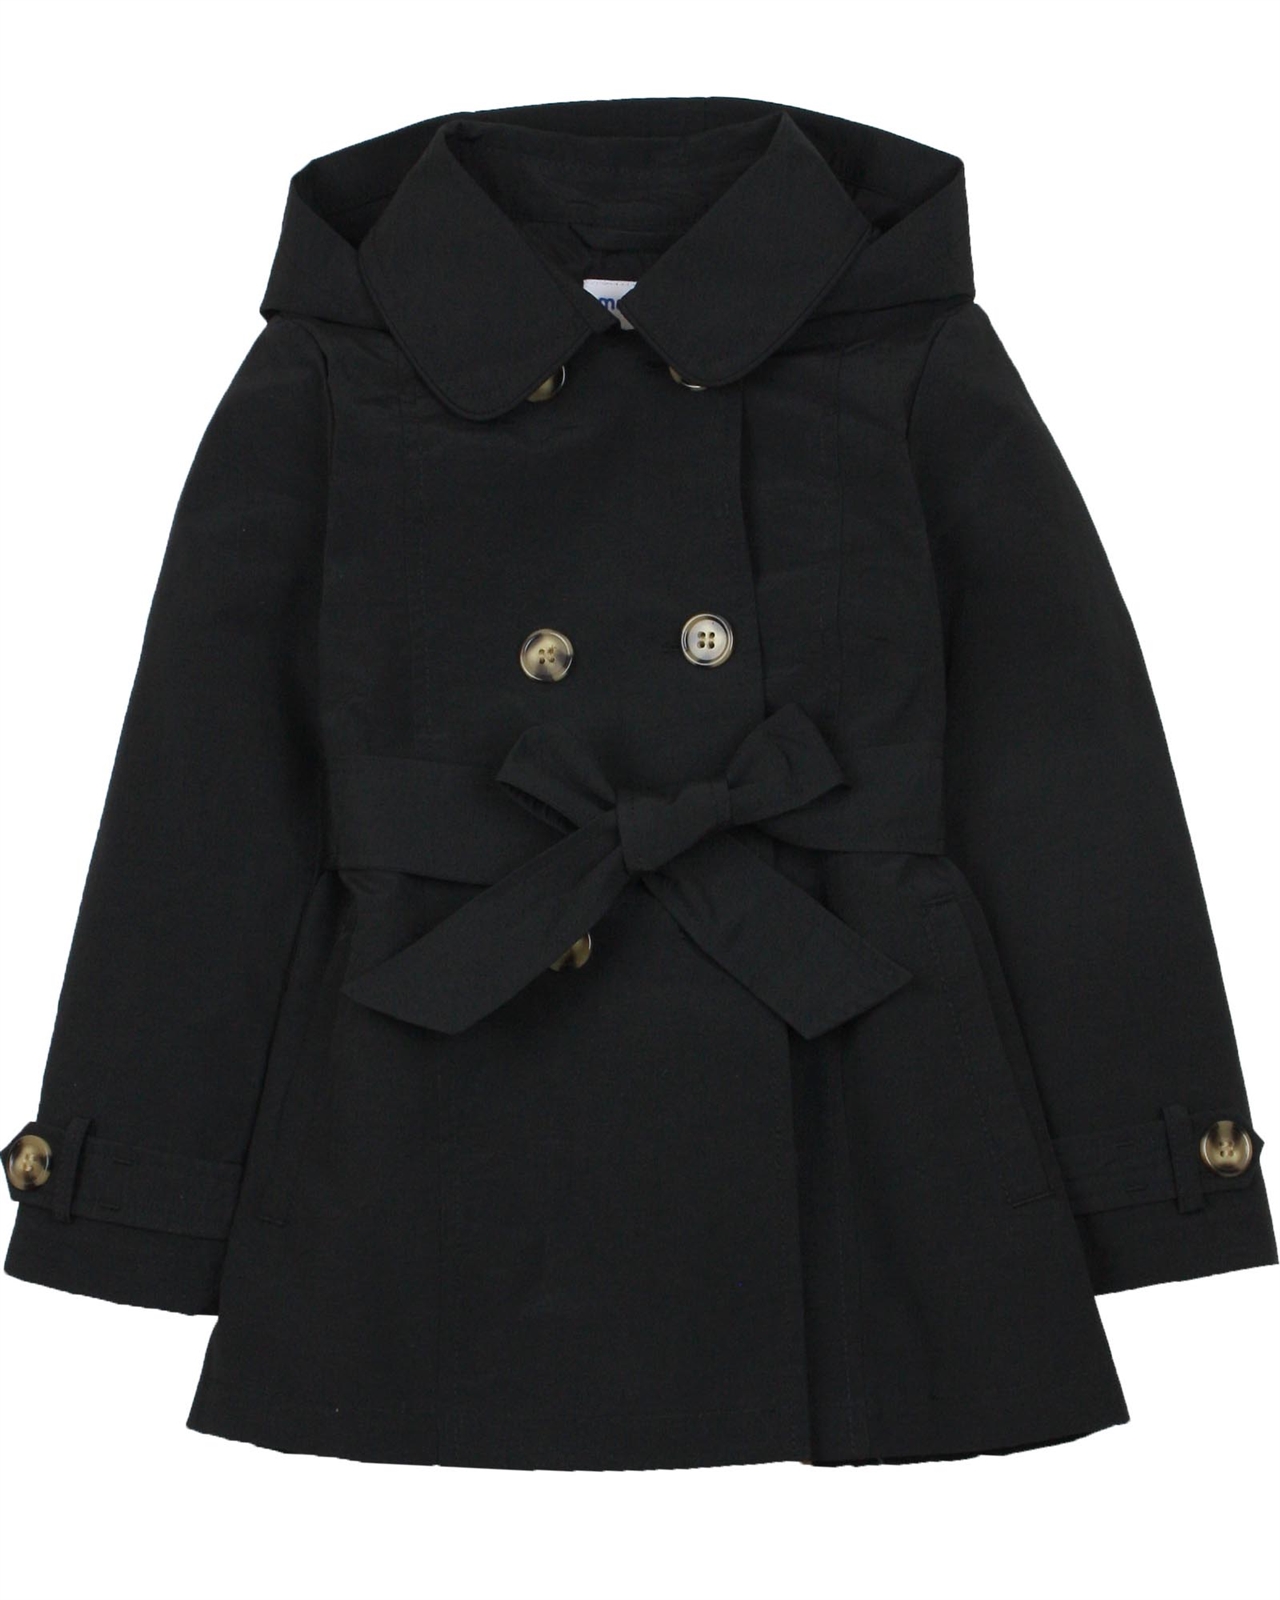 MAYORAL Junior Girl's Classic Trench Coat Sizes 8-18